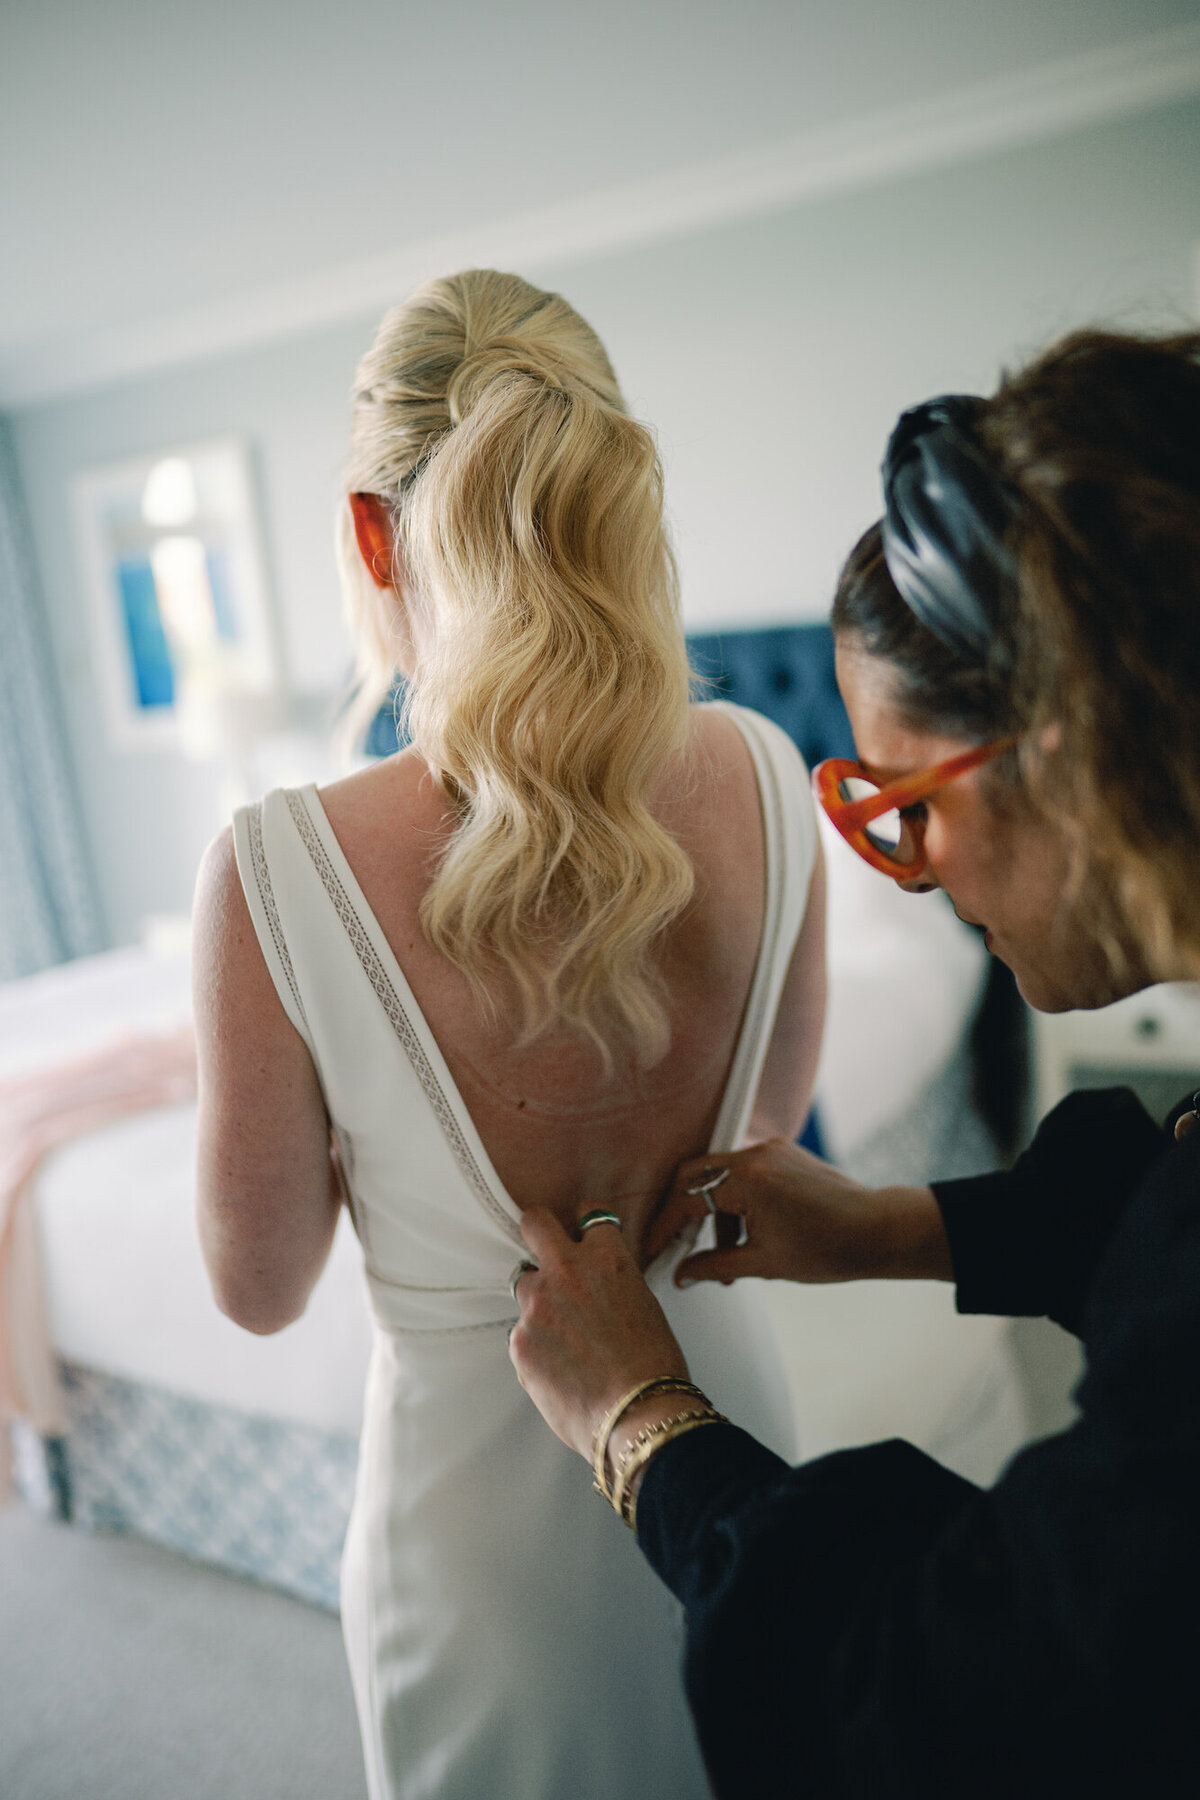 Ocean-House-RI-Watch-Hill-Westerly-Erica-Renee-Beauty-luxury-hair-makeup-team-party-pony-beauty-touch-up-services-natural-wedding-makeup-bridal-hair-stylist